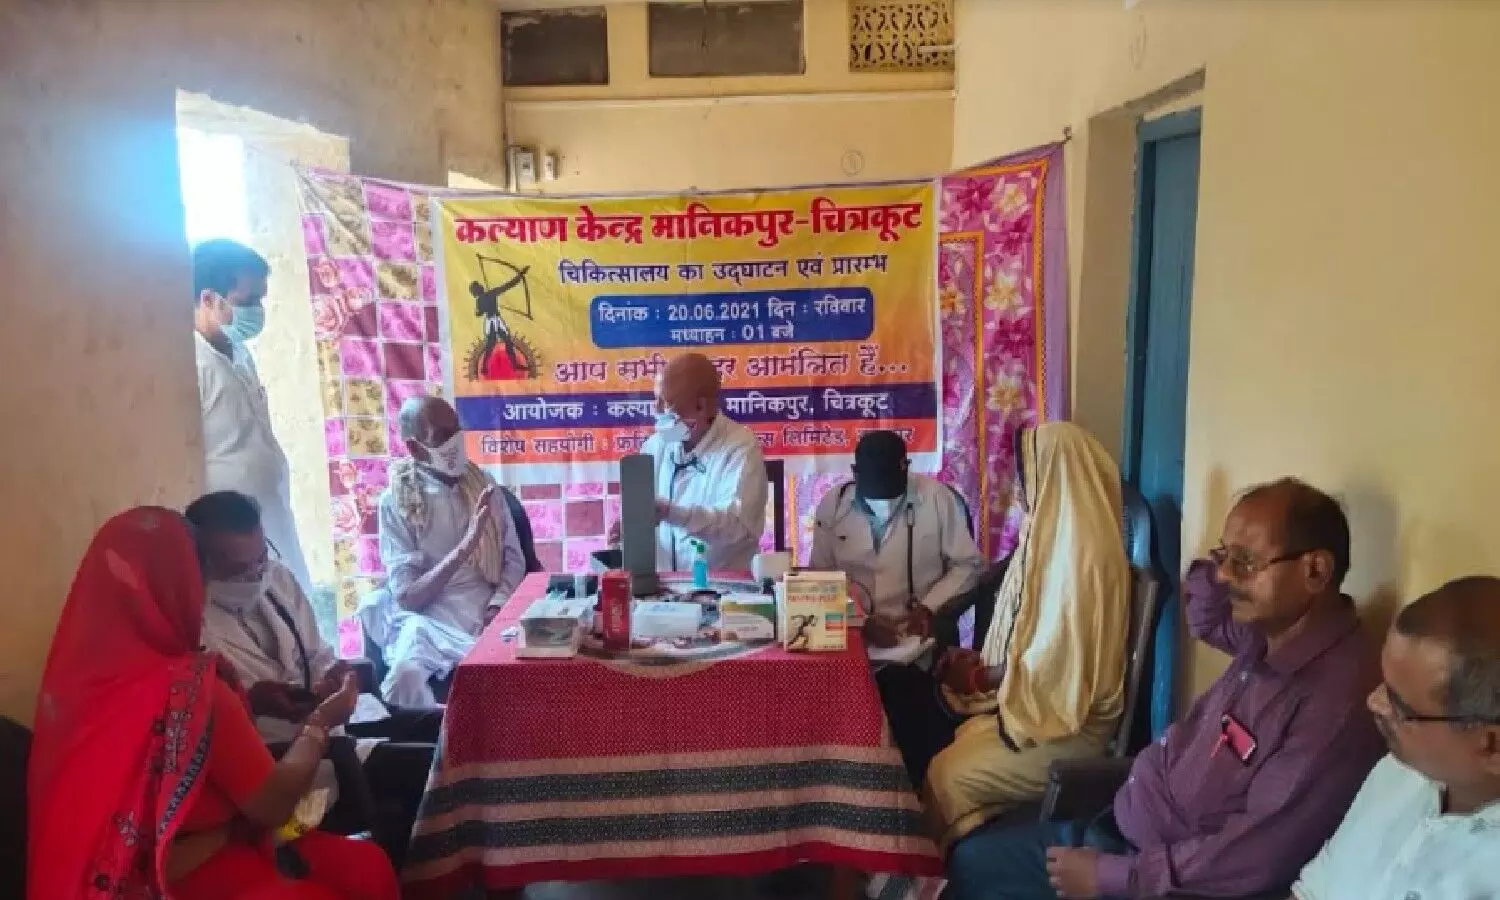 Free medical treatment started in Wellness Center Manikpur